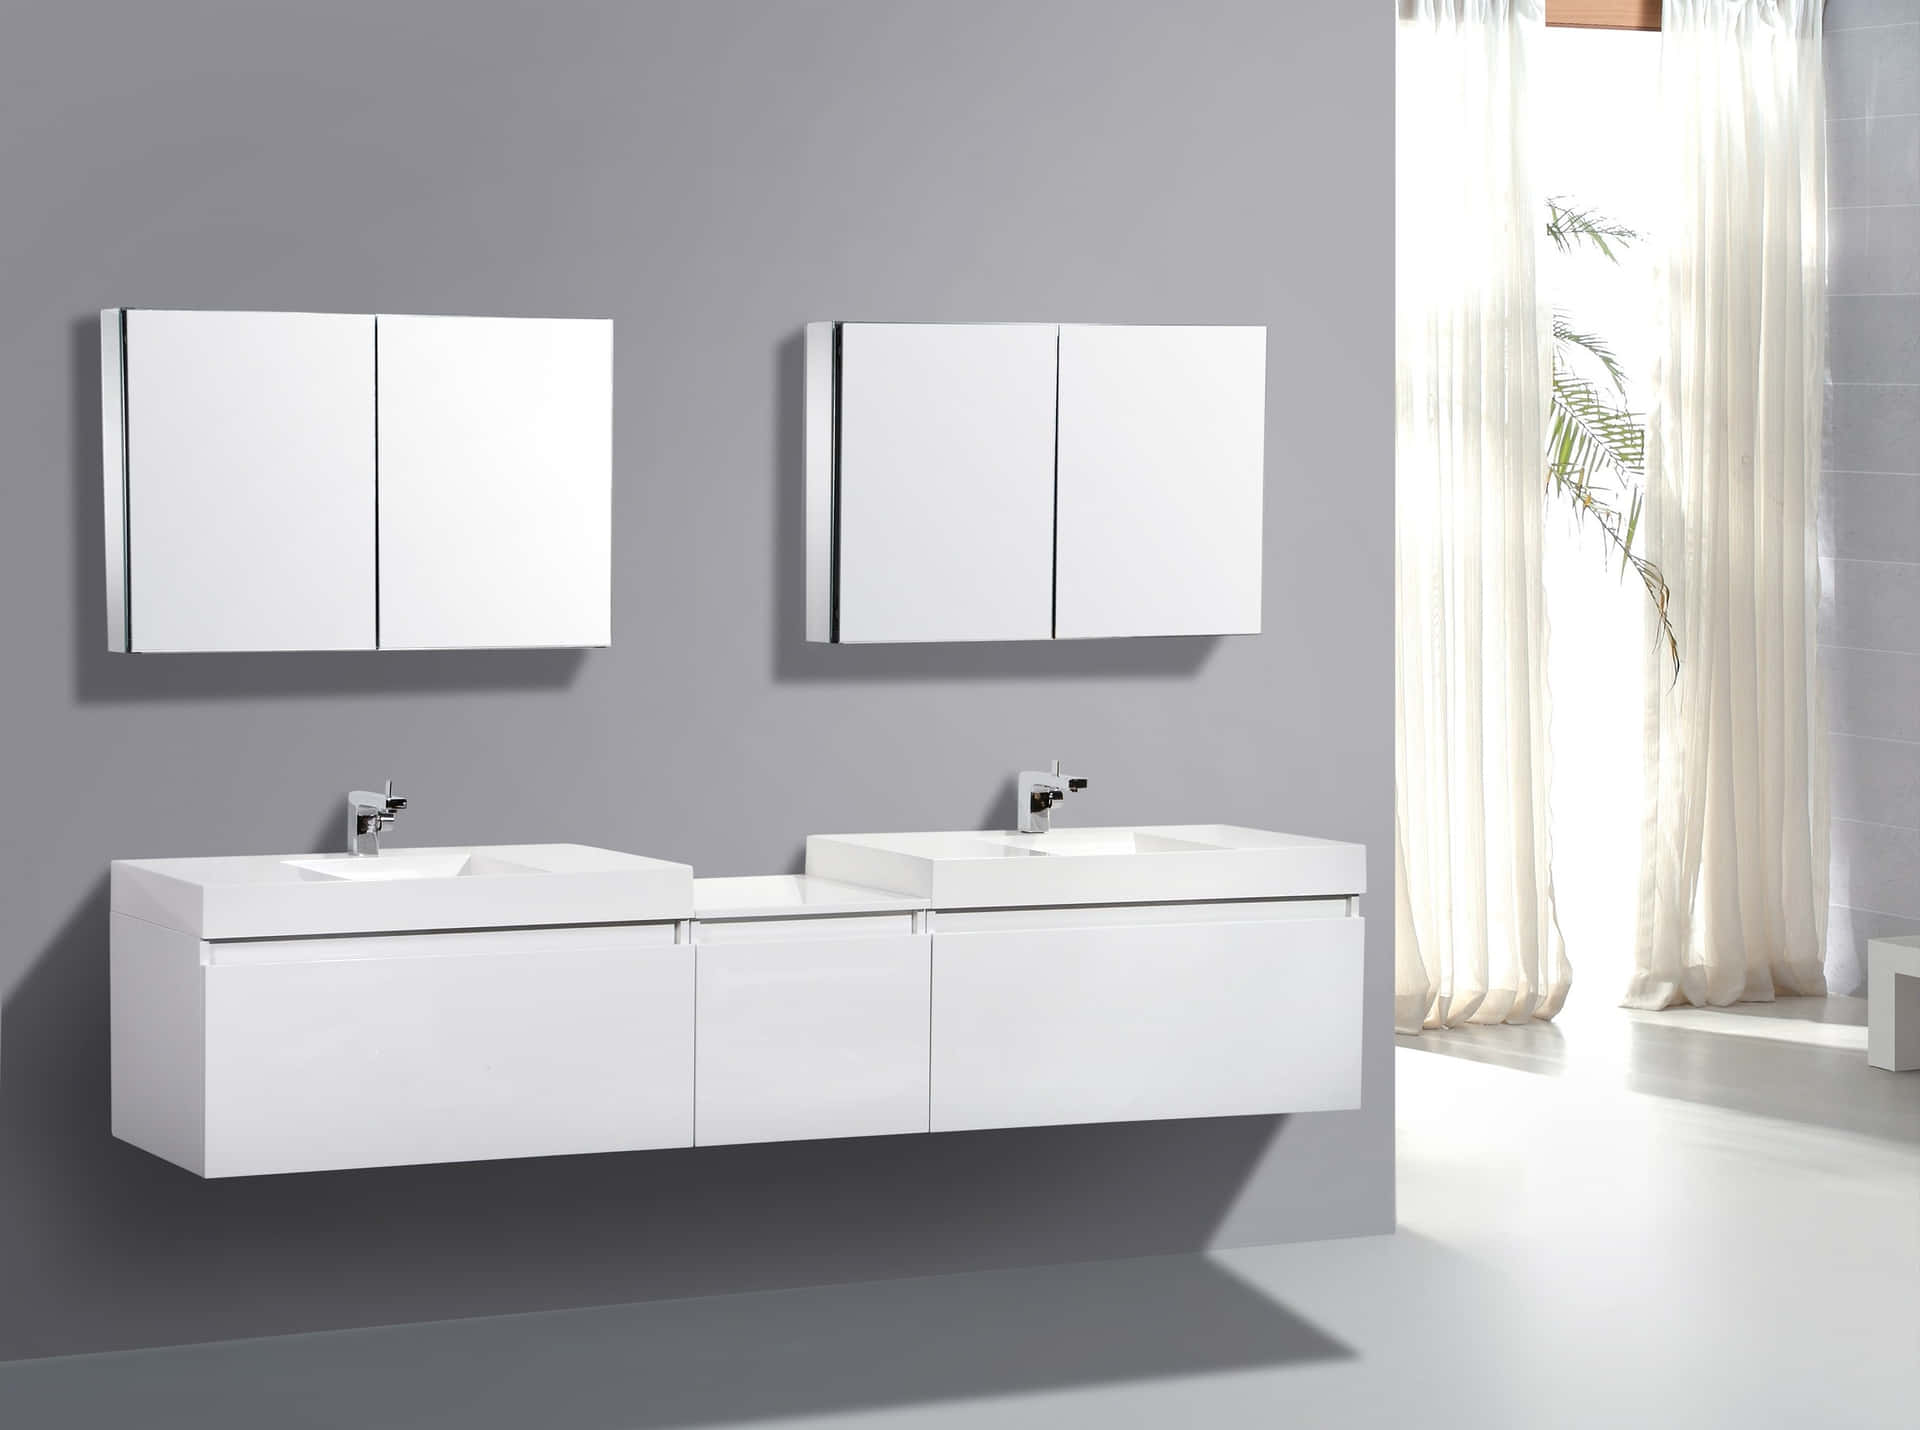 A Bathroom Vanity With Two Sinks And Mirrors